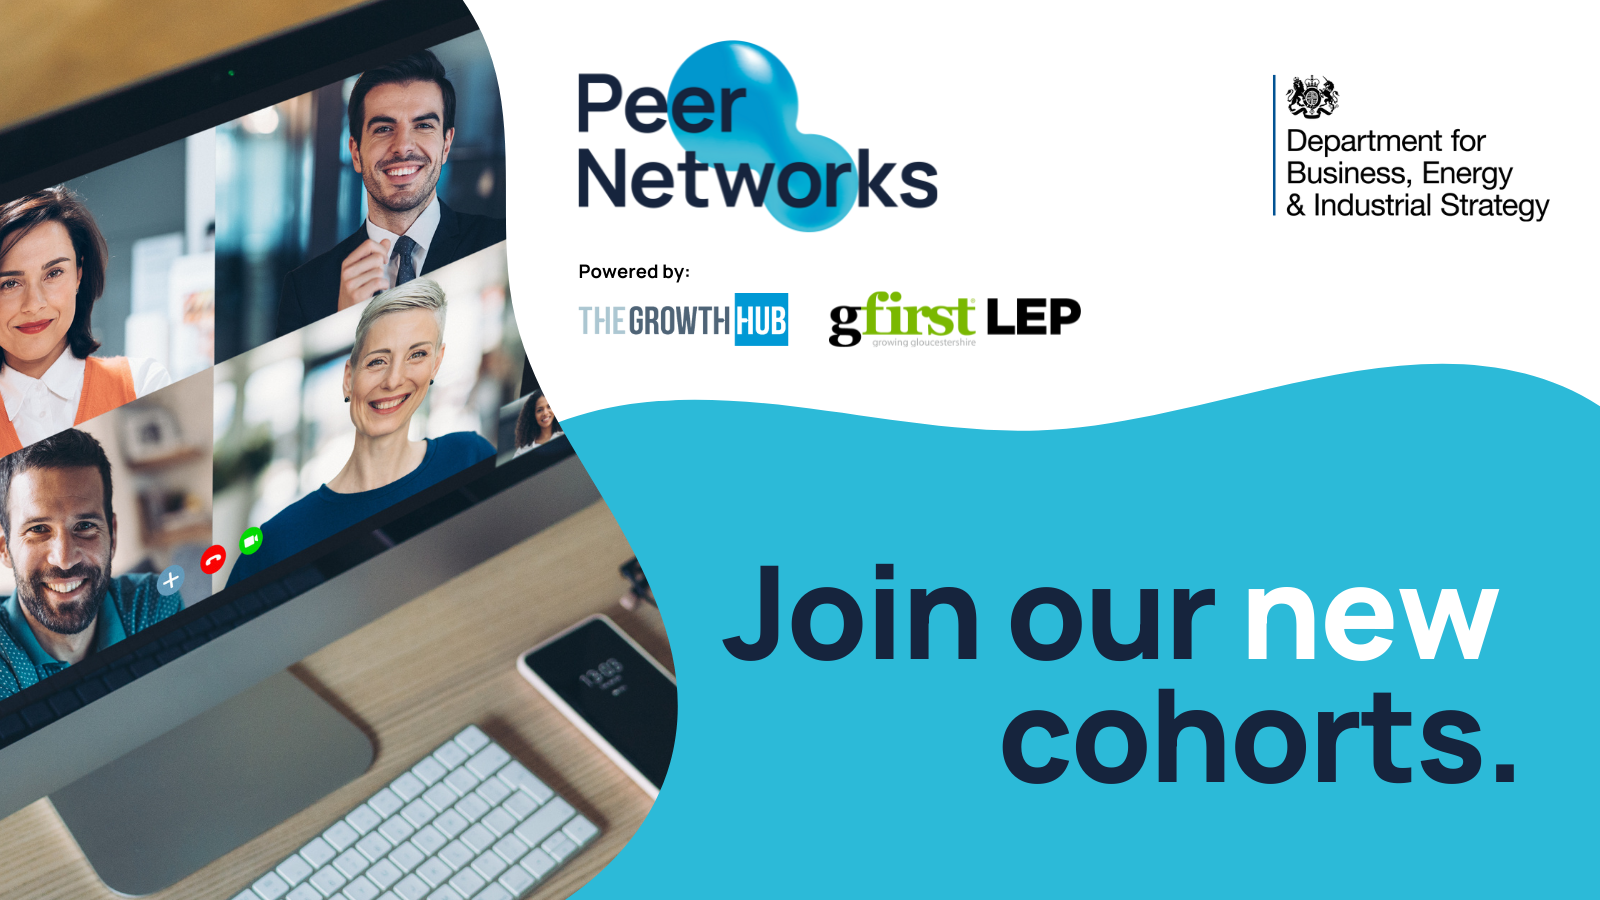 Gloucestershire’s Peer Networks programme extended by BEIS to include three new cohorts